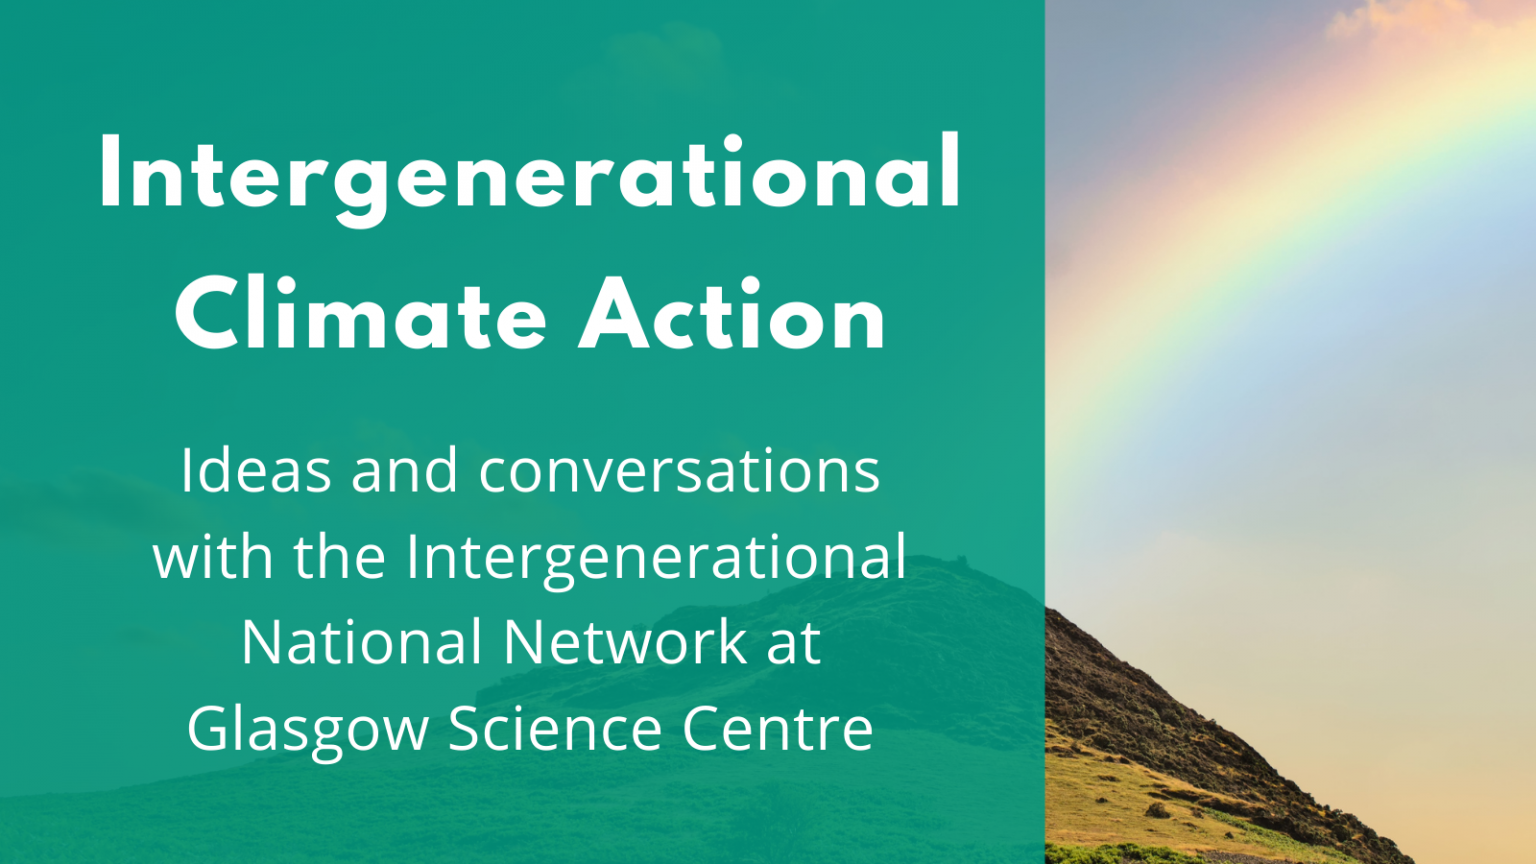 Intergenerational Climate Action - ideas and converations from the Intergenerational National Network at the Glasgow Science Centre